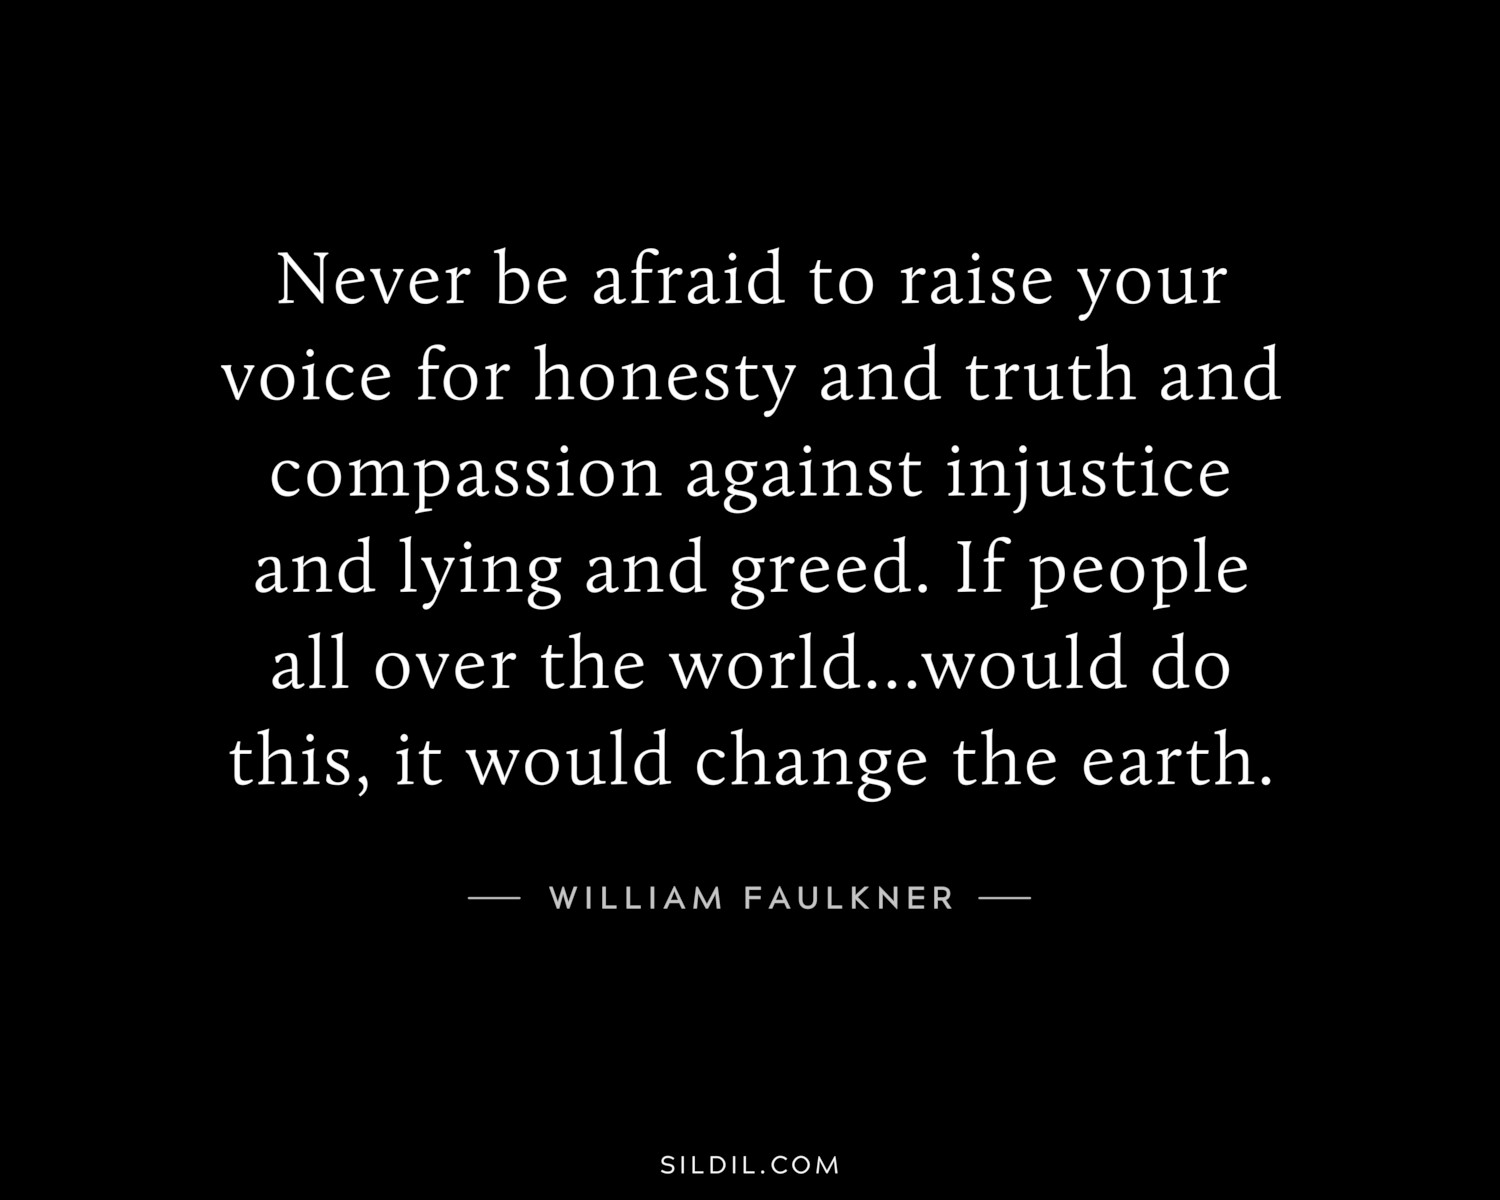 Never be afraid to raise your voice for honesty and truth and compassion against injustice and lying and greed. If people all over the world...would do this, it would change the earth.